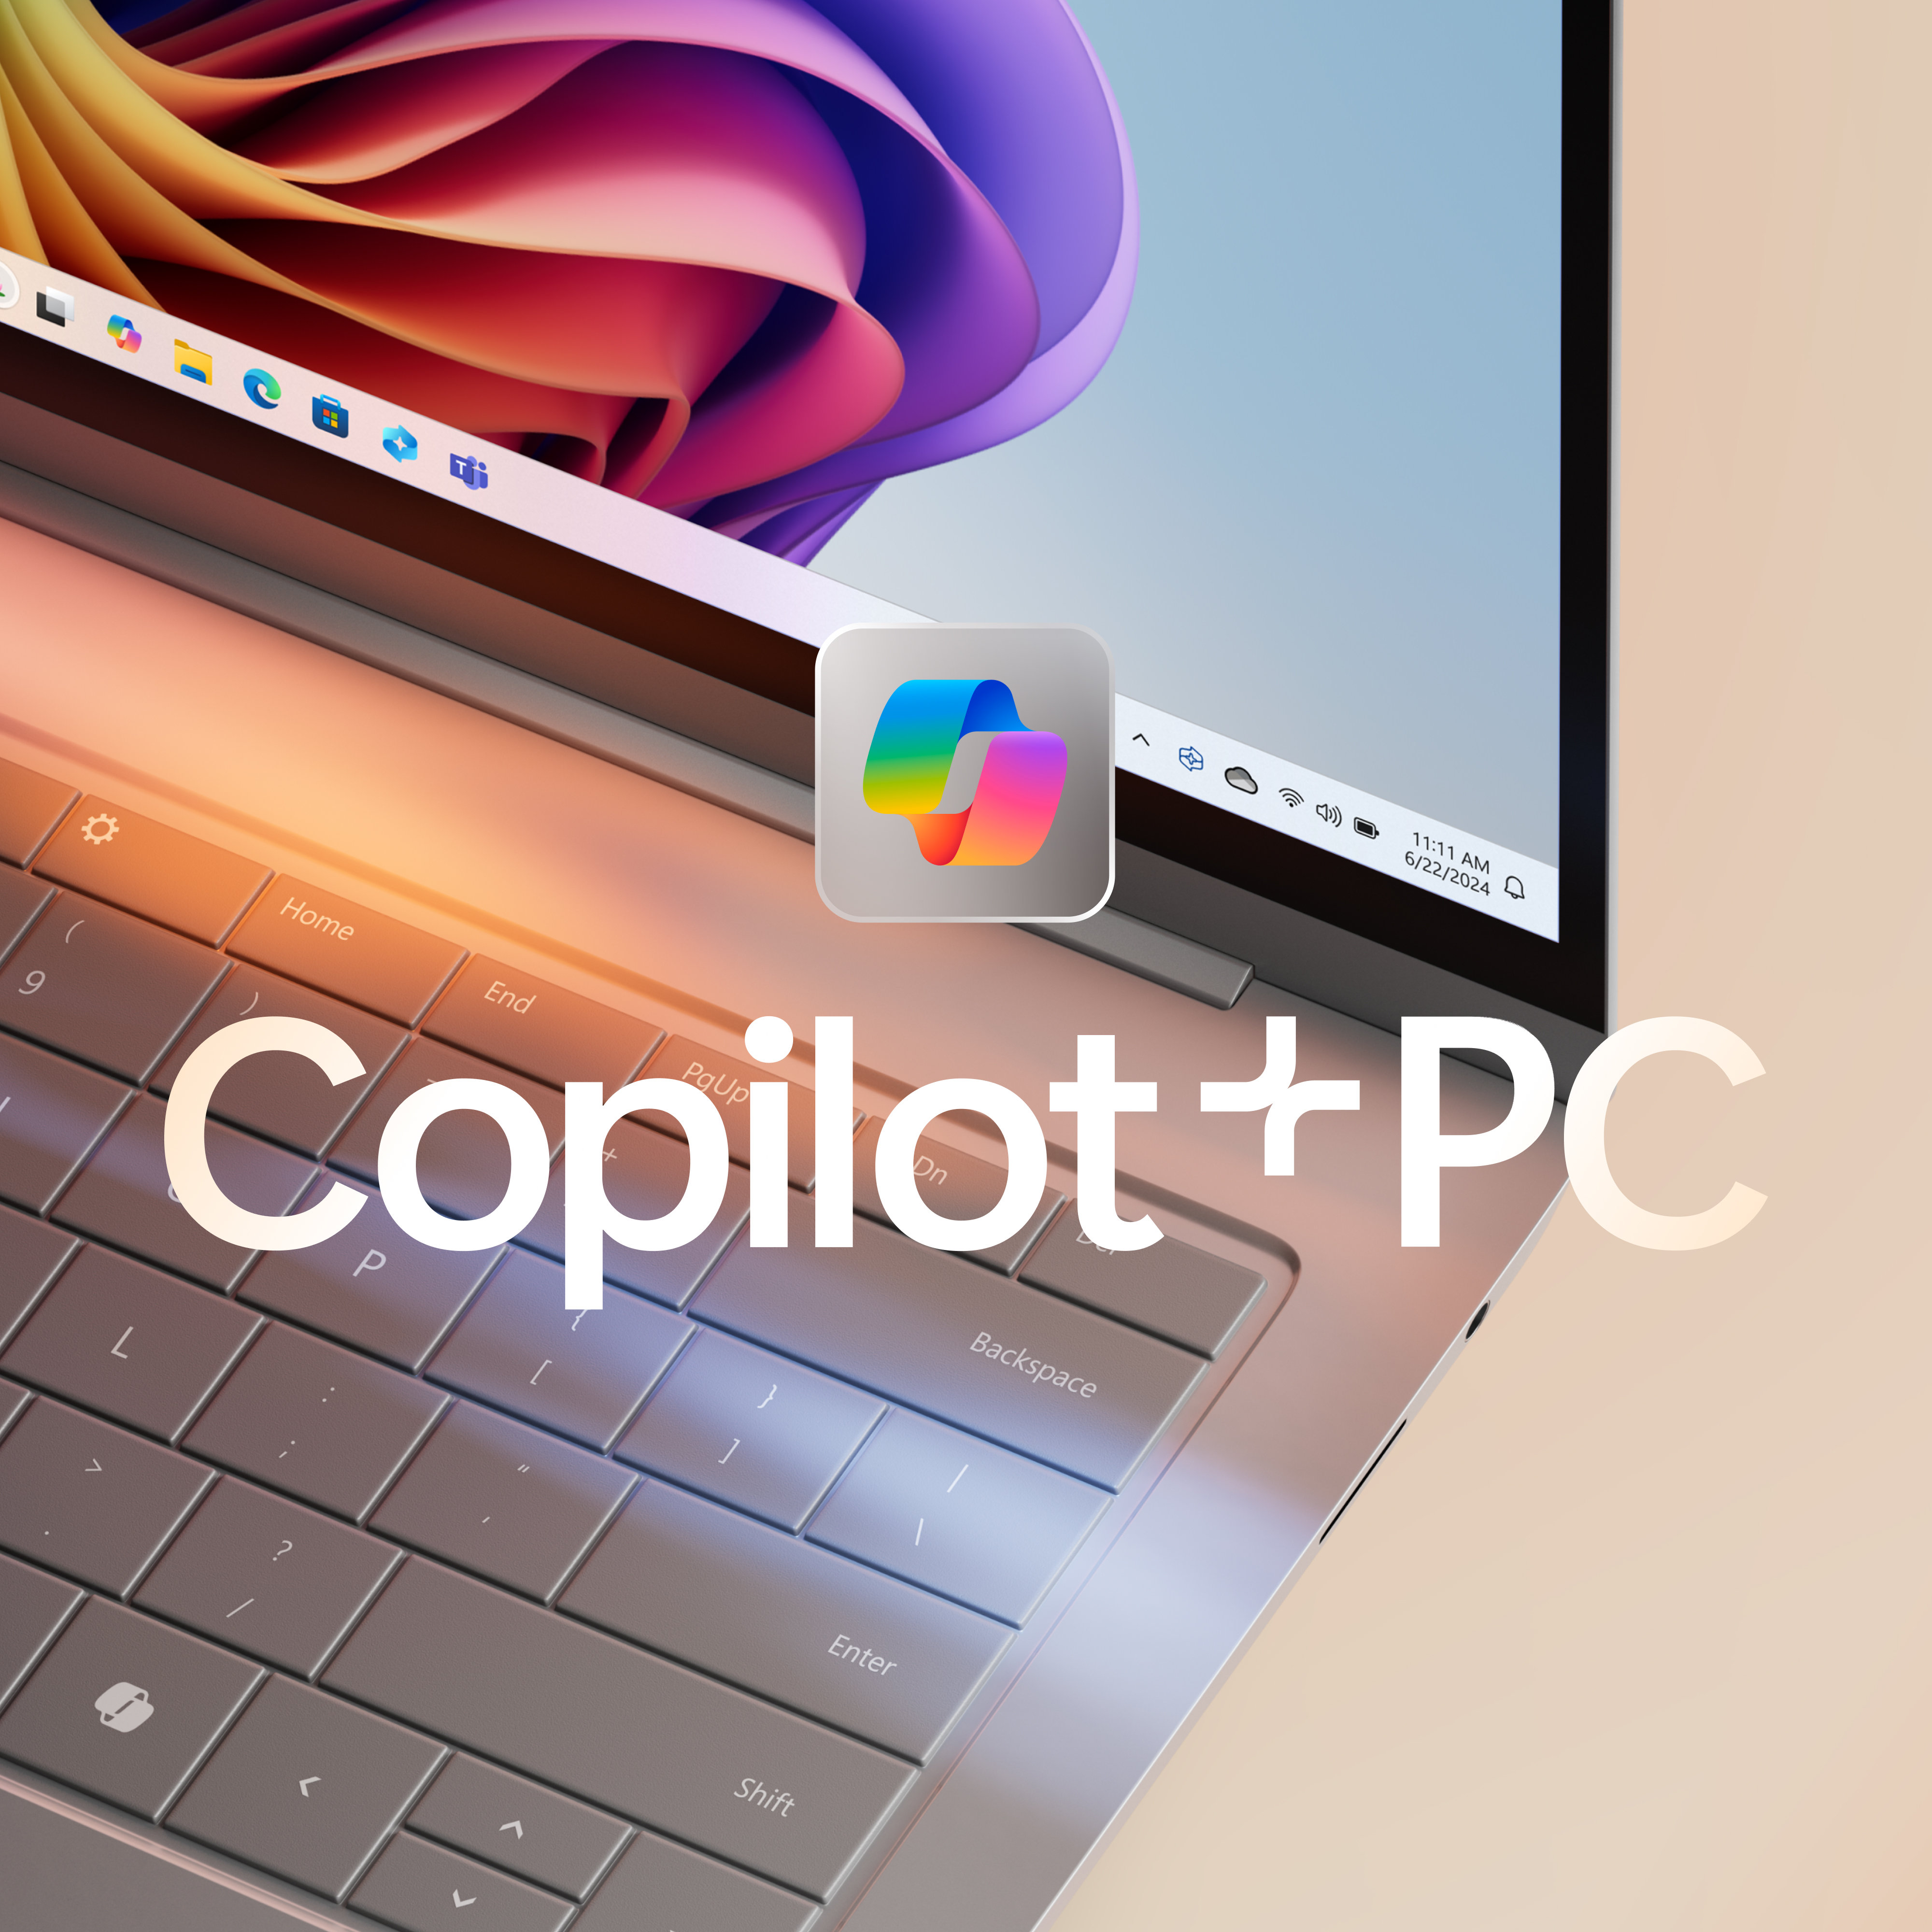 A Windows 11 PC with colorful bloom and Copilot icon on the screen